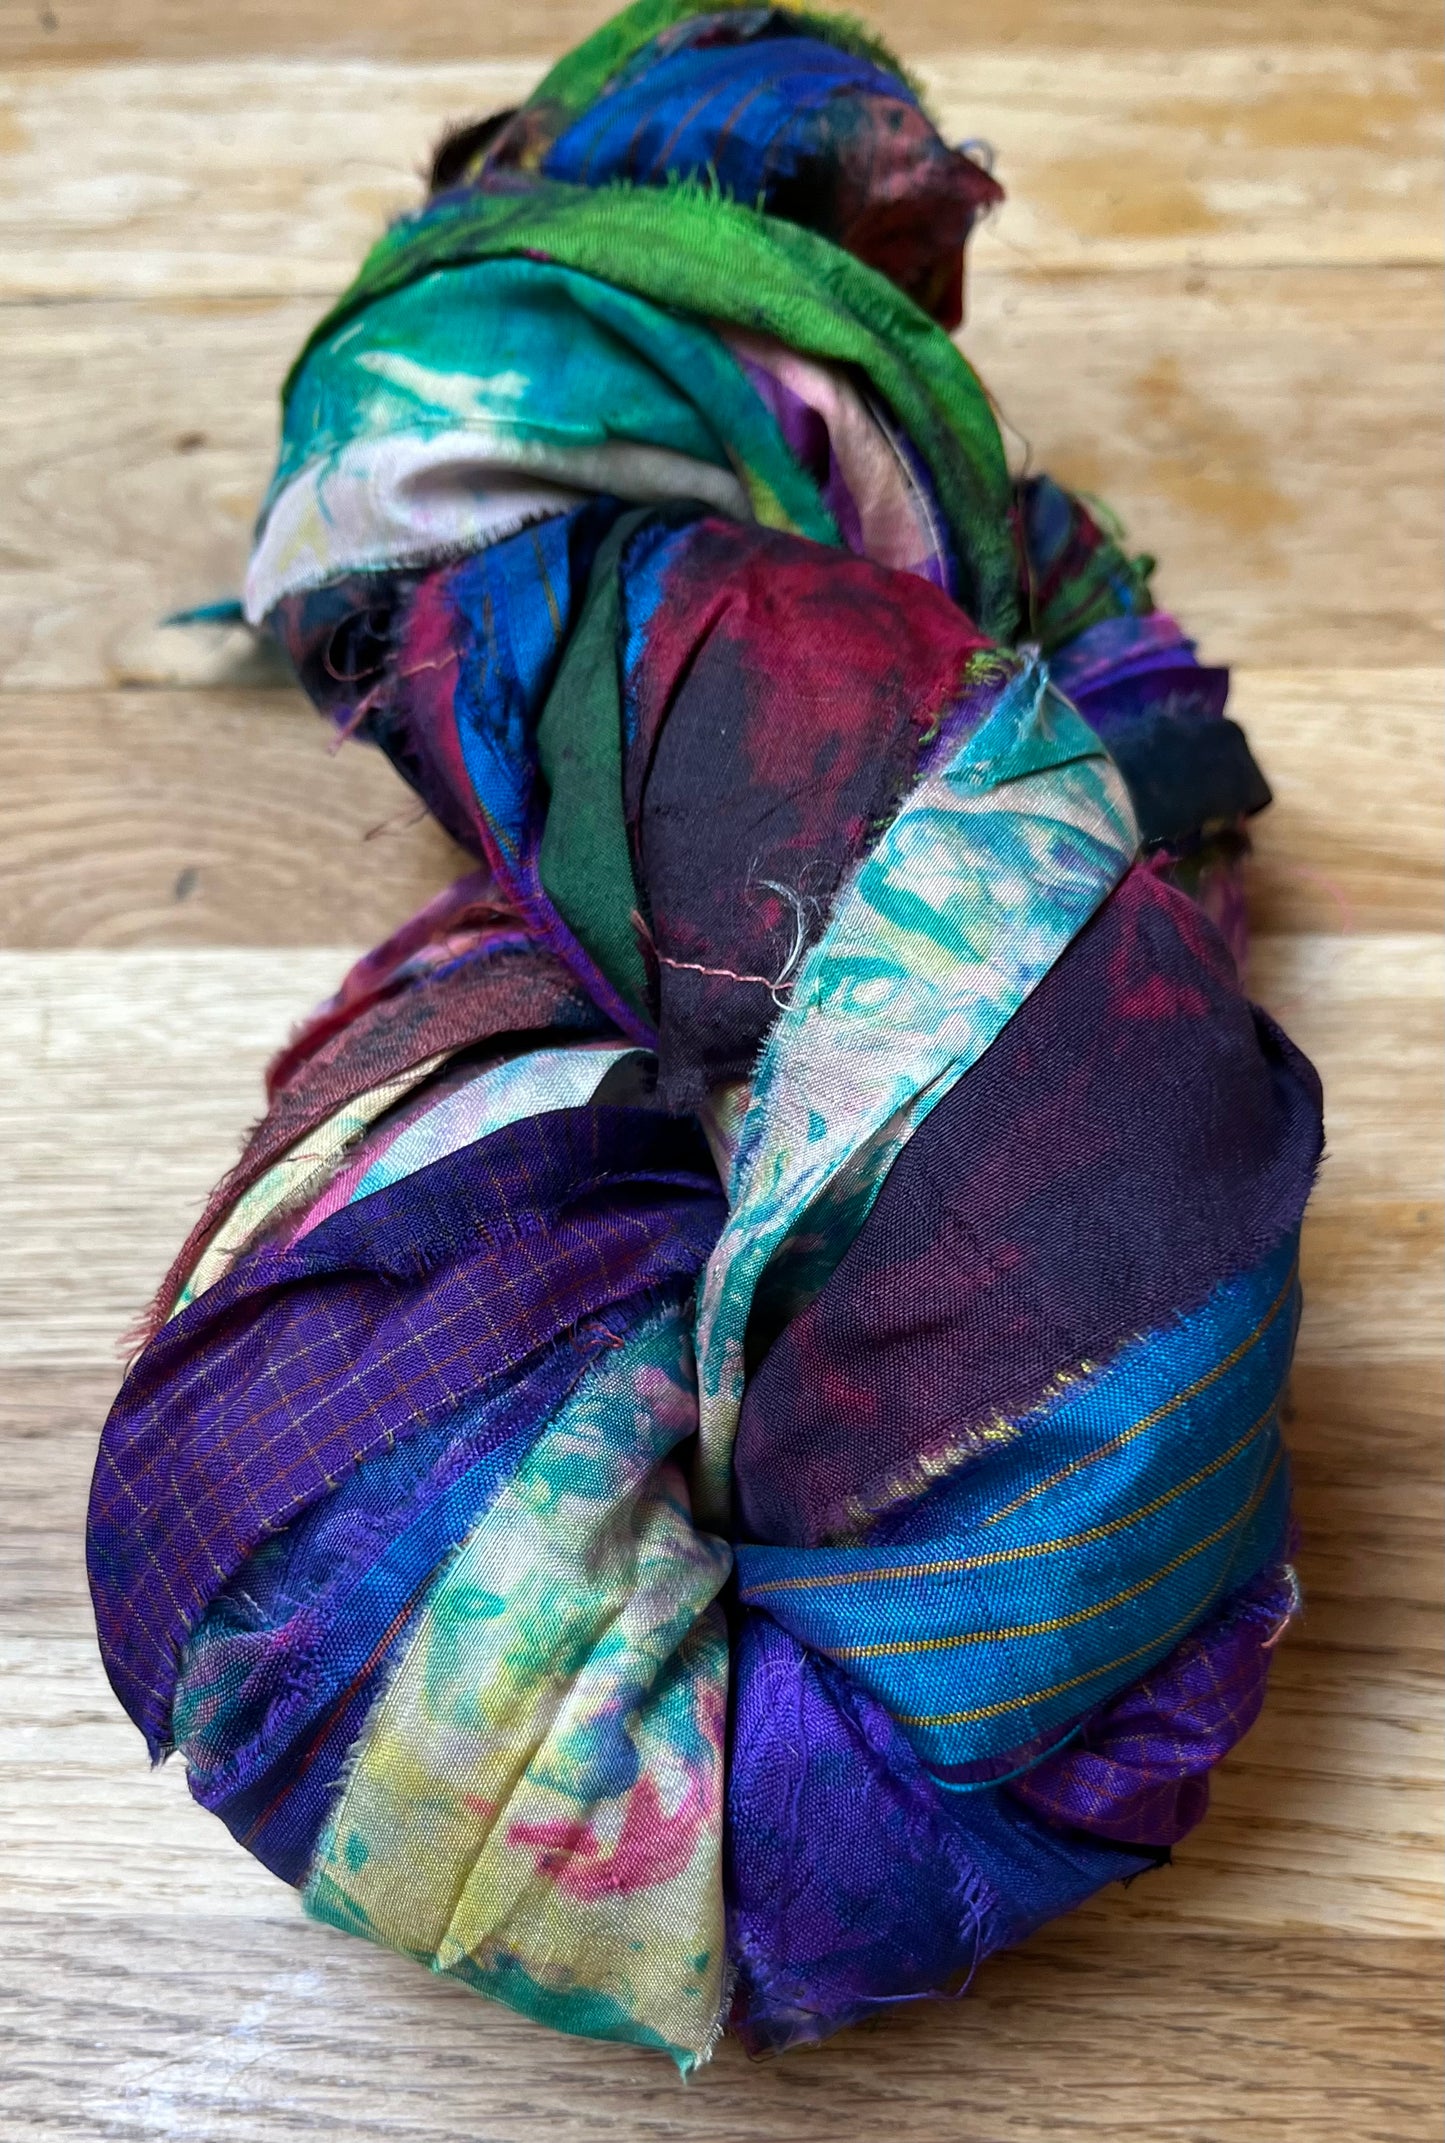 Sari silk ribbon expertly tie dyed by artisans in india.